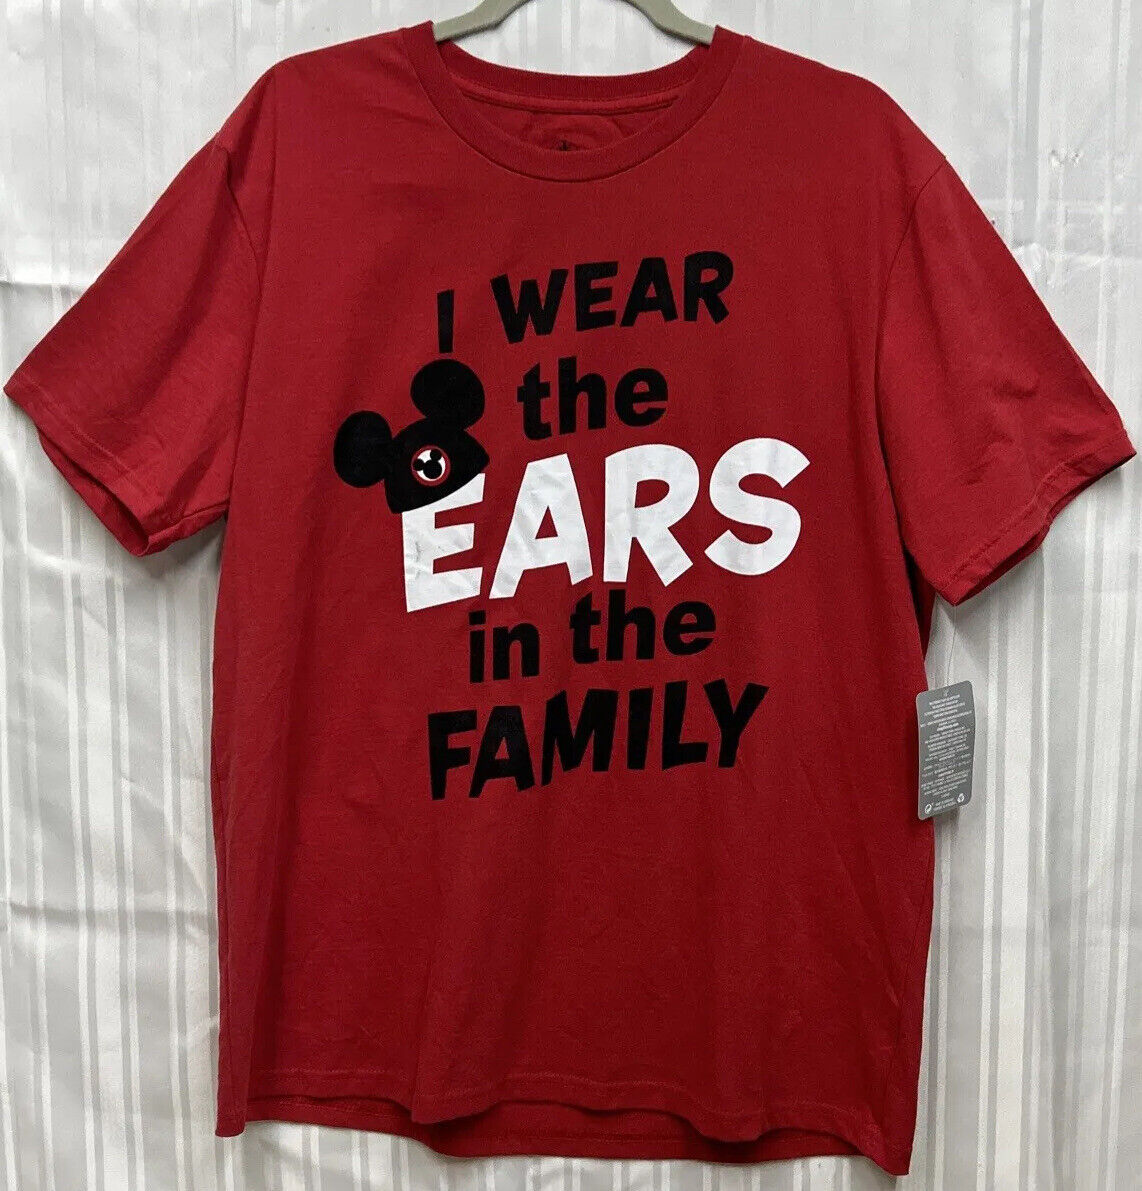 Disney Short Sleeve T Shirt Adult L I Wear The Ears in the Family Red